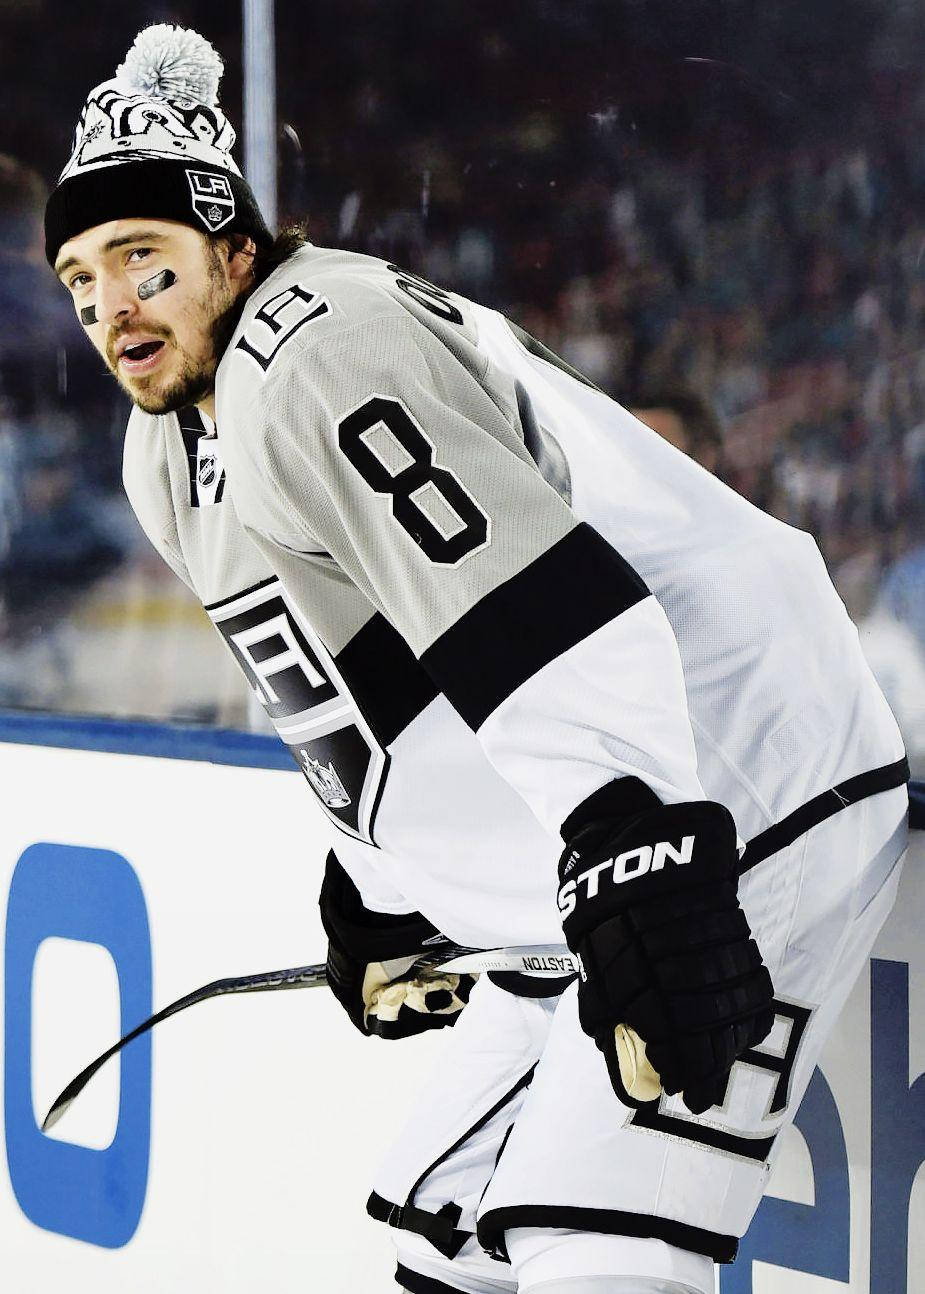 Drew Doughty Leaning Forward While Holding Hockey Stick In Front Wallpaper